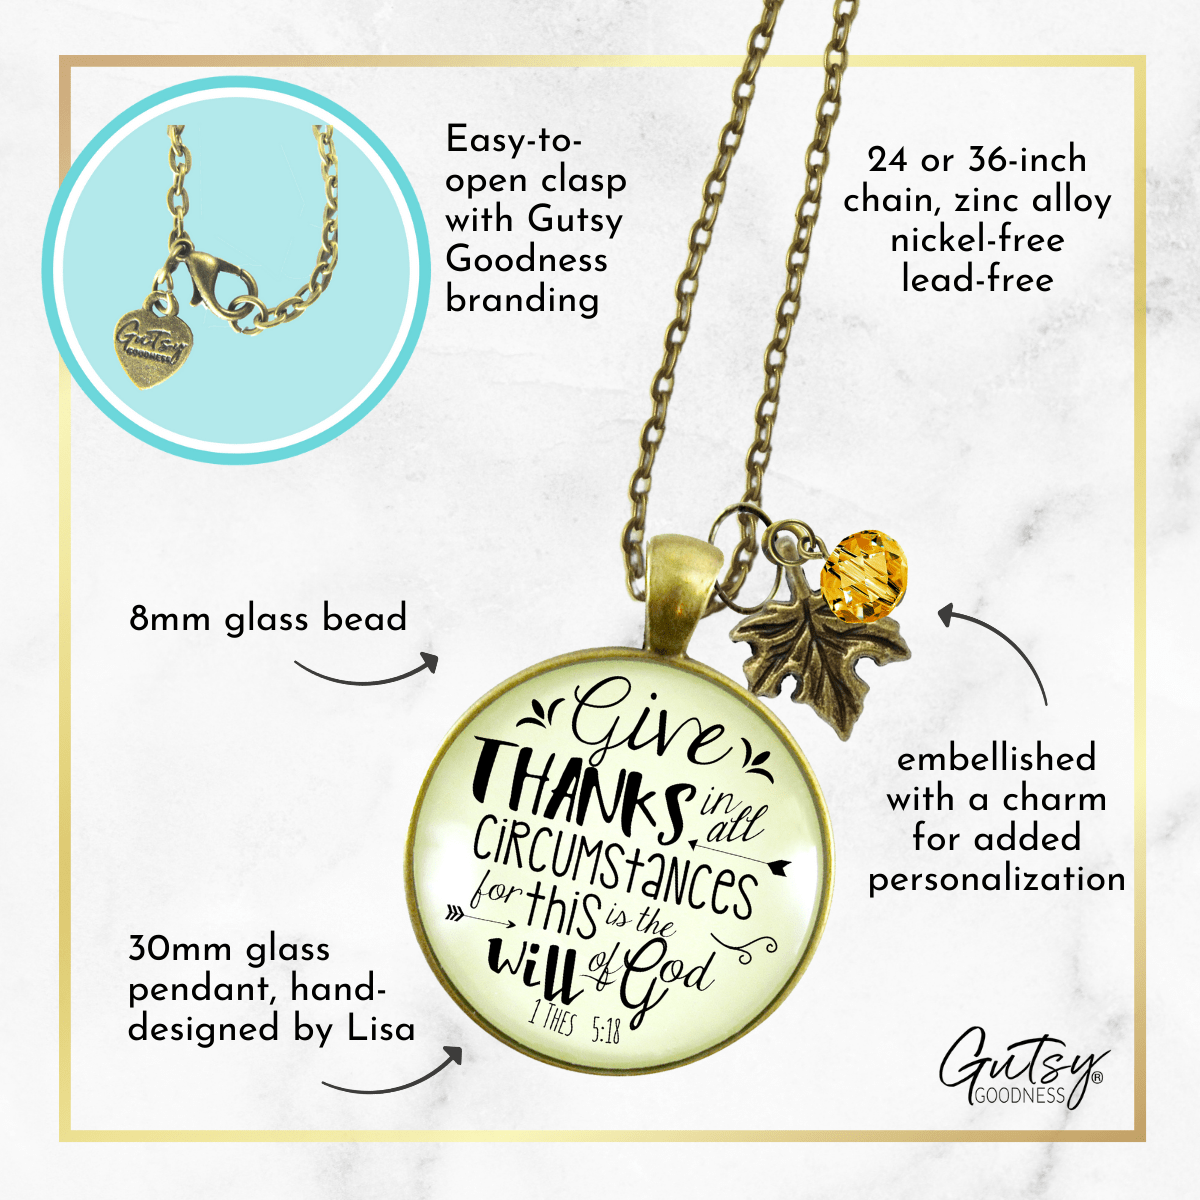 Gutsy Goodness Autumn Necklace Give Thanks In All Circumstances Faith Inspired Jewelry - Gutsy Goodness Handmade Jewelry;Autumn Necklace Give Thanks In All Circumstances Faith Inspired Jewelry - Gutsy Goodness Handmade Jewelry Gifts